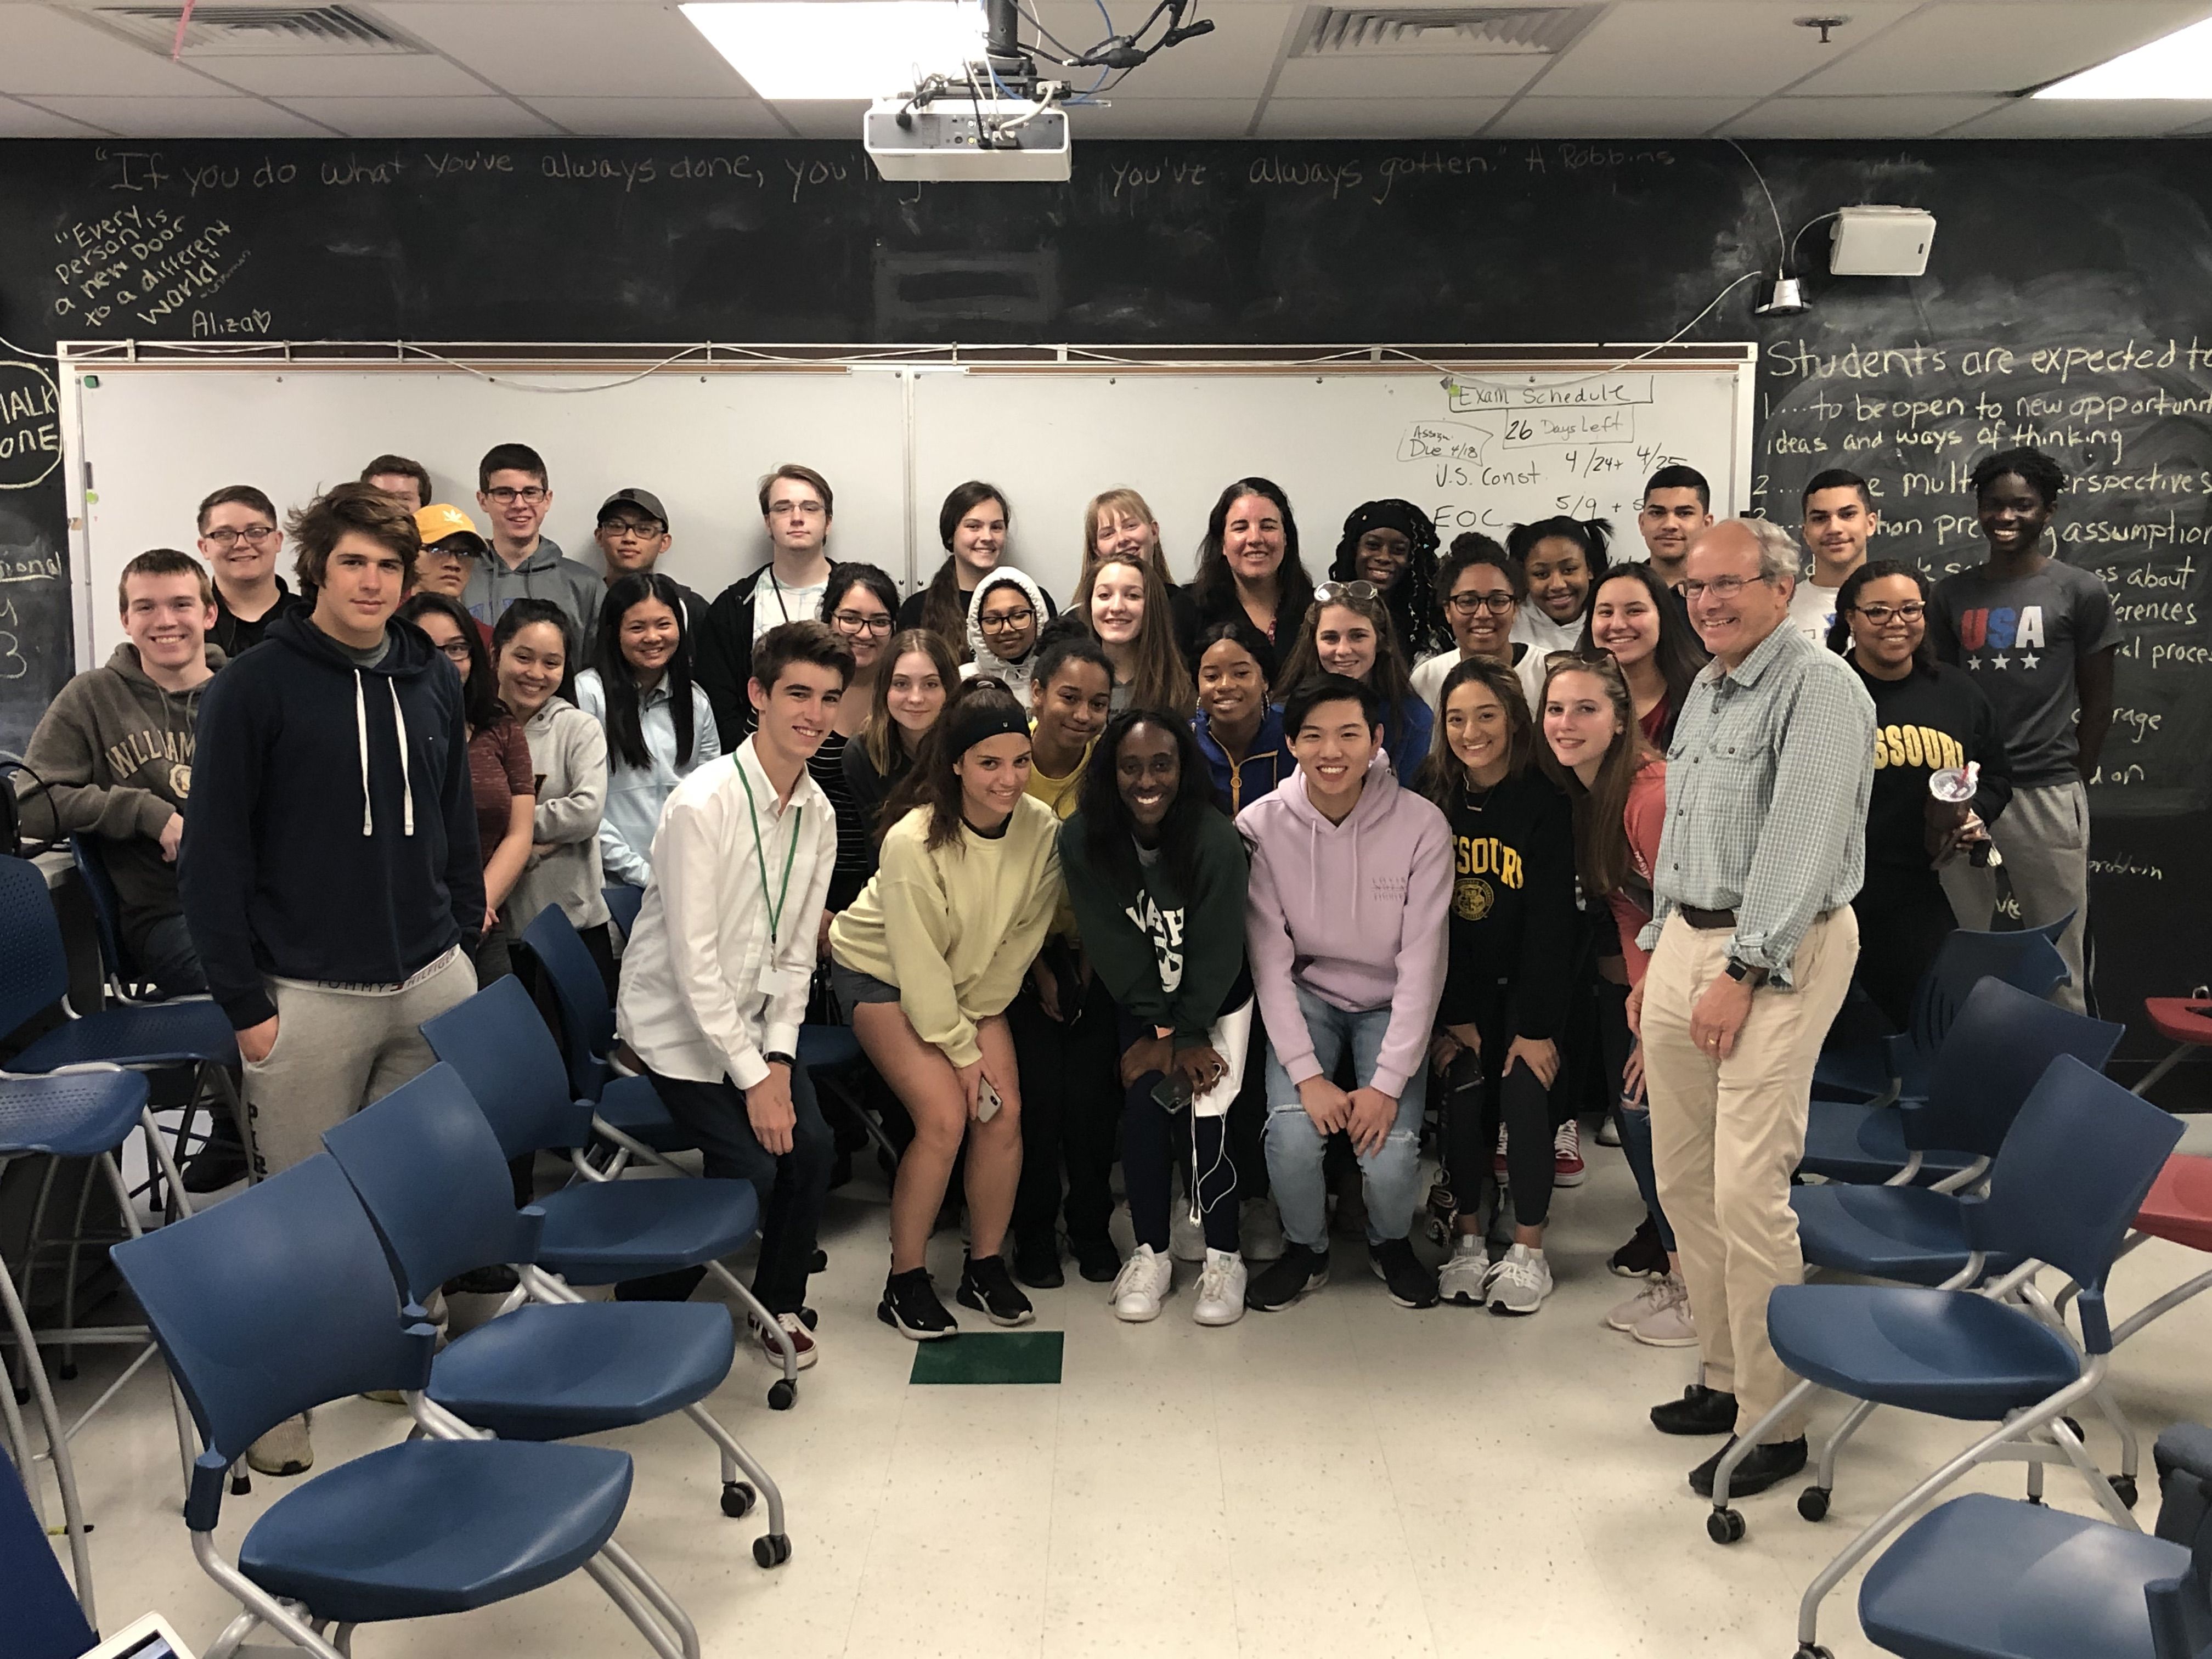 Bill Freivogel poses with students from Pattonville High School after their discussion about civil asset forfeiture. Maryland Heights, MO, 2019. Image courtesy Pattonville High School.